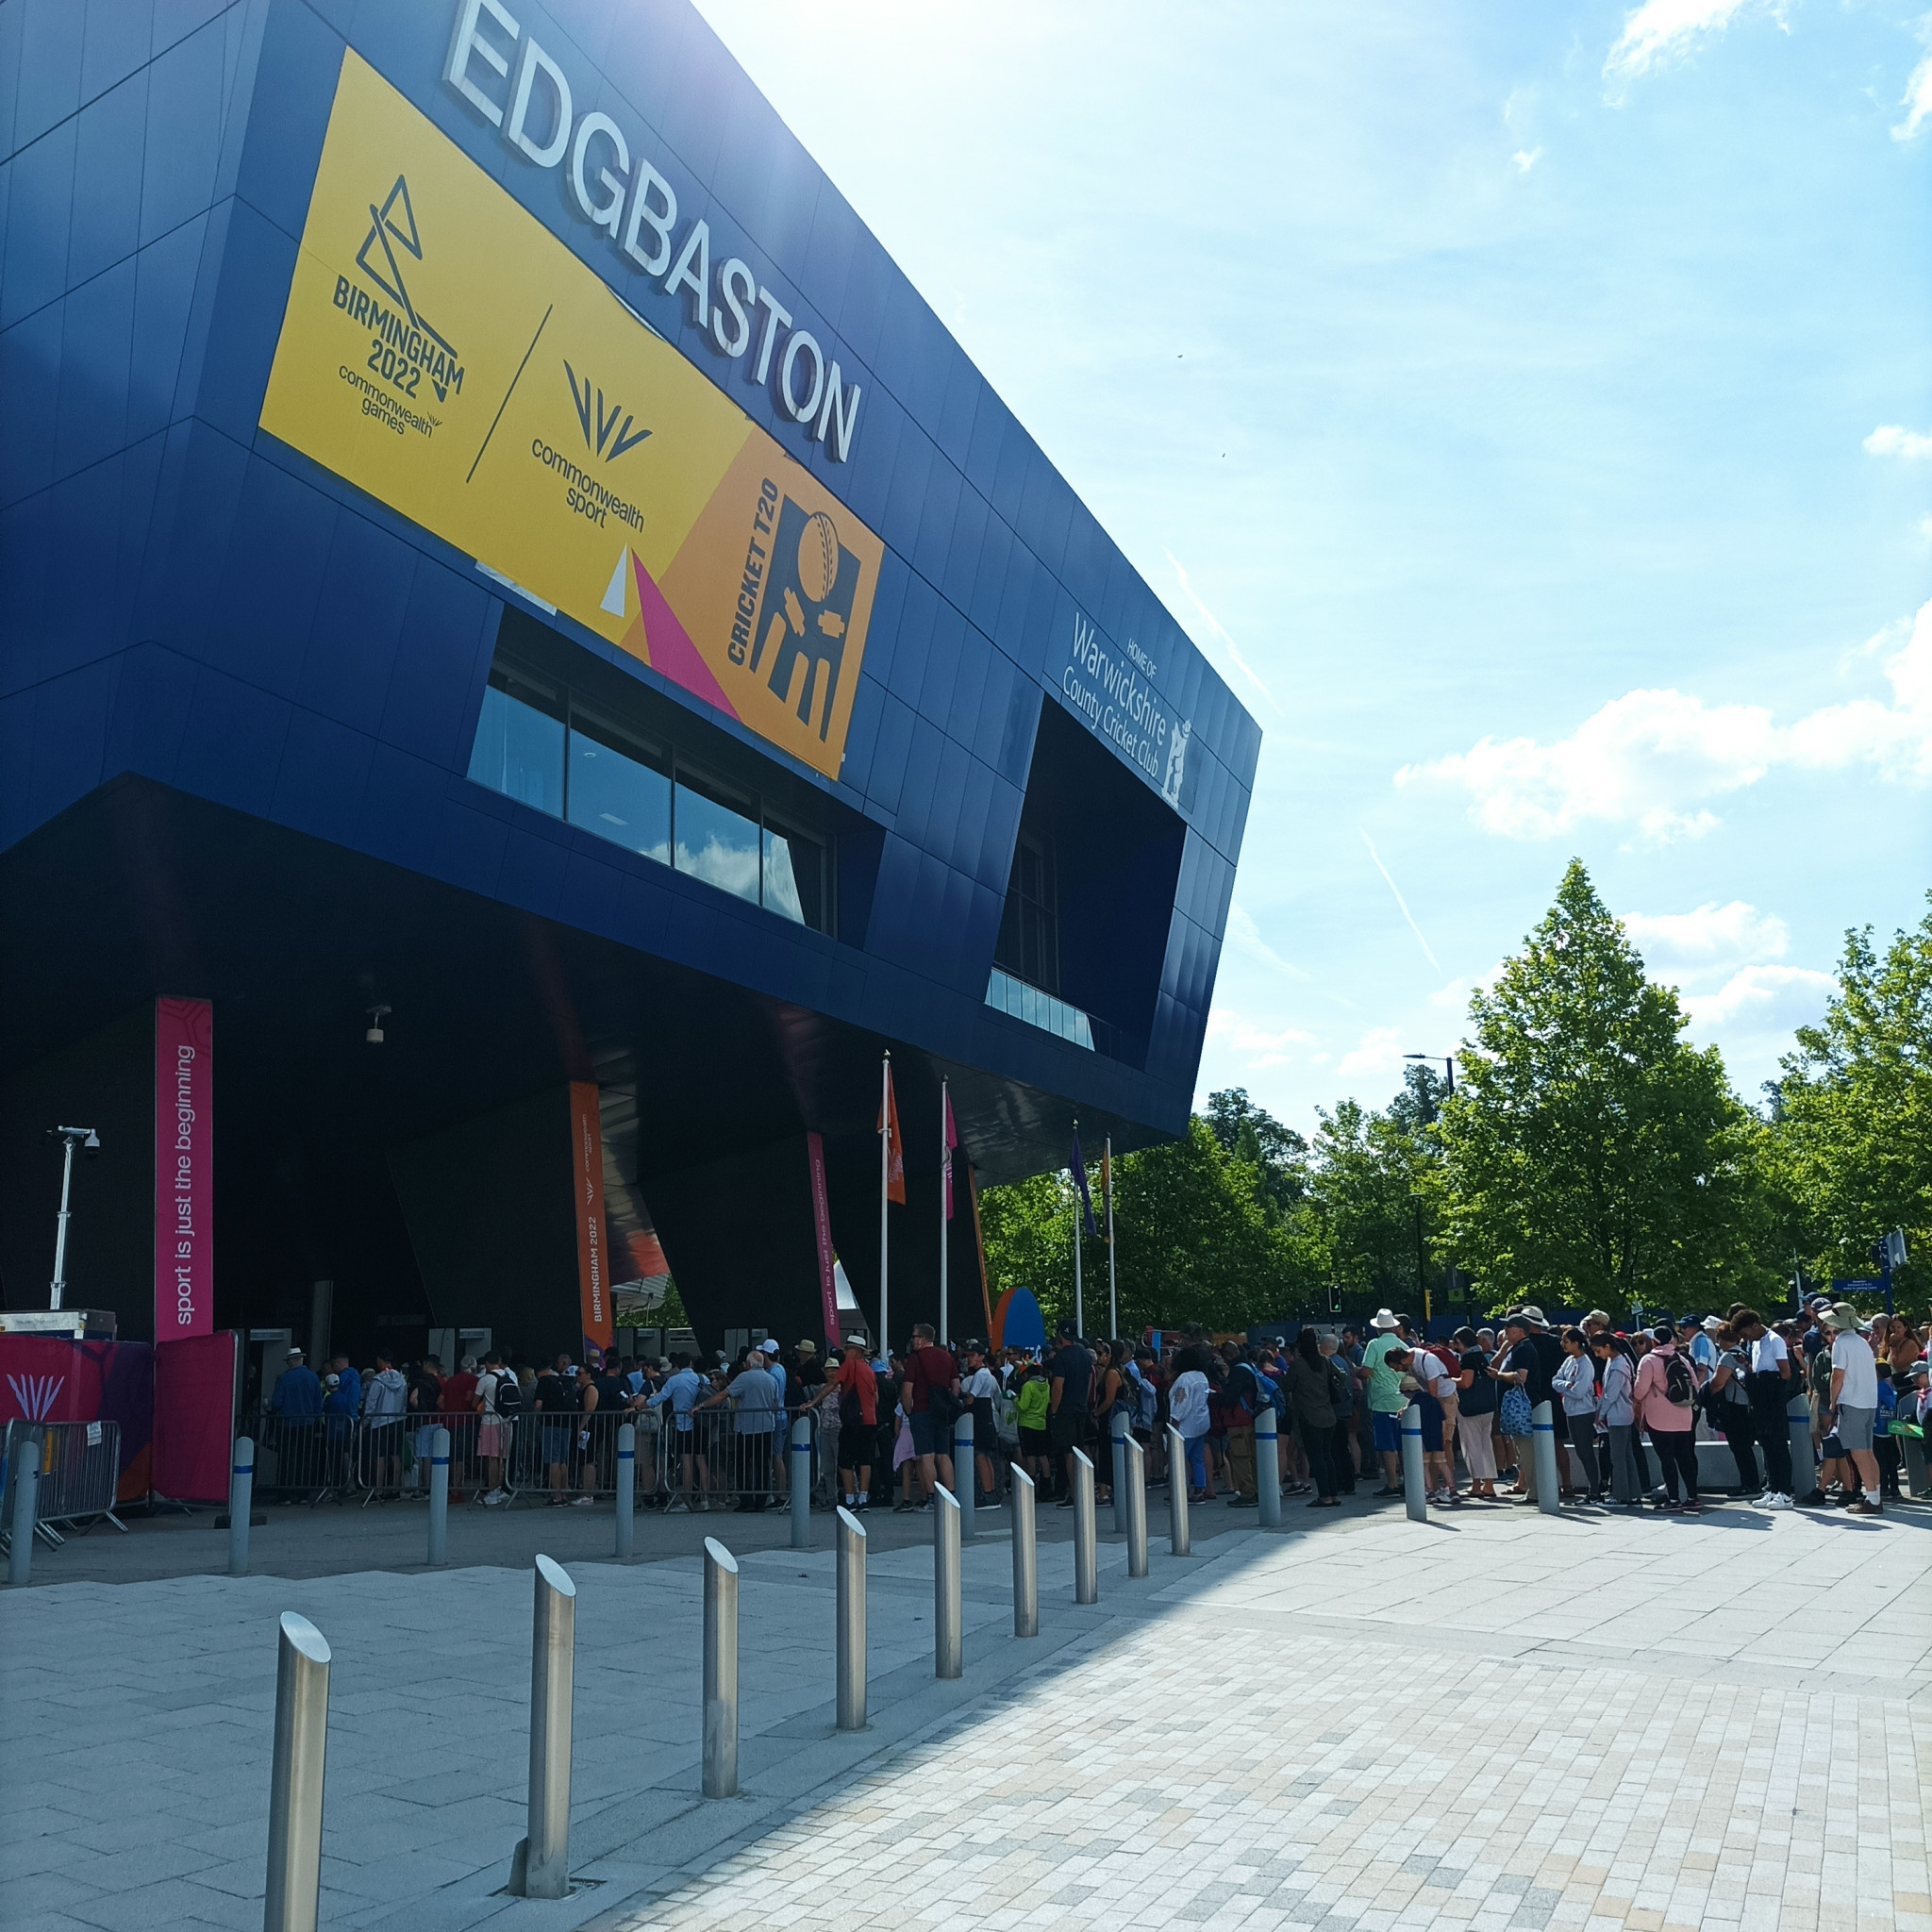 Crowds queuing at Edgbaston during the Commonwealth Games T20 tournament ©ITG